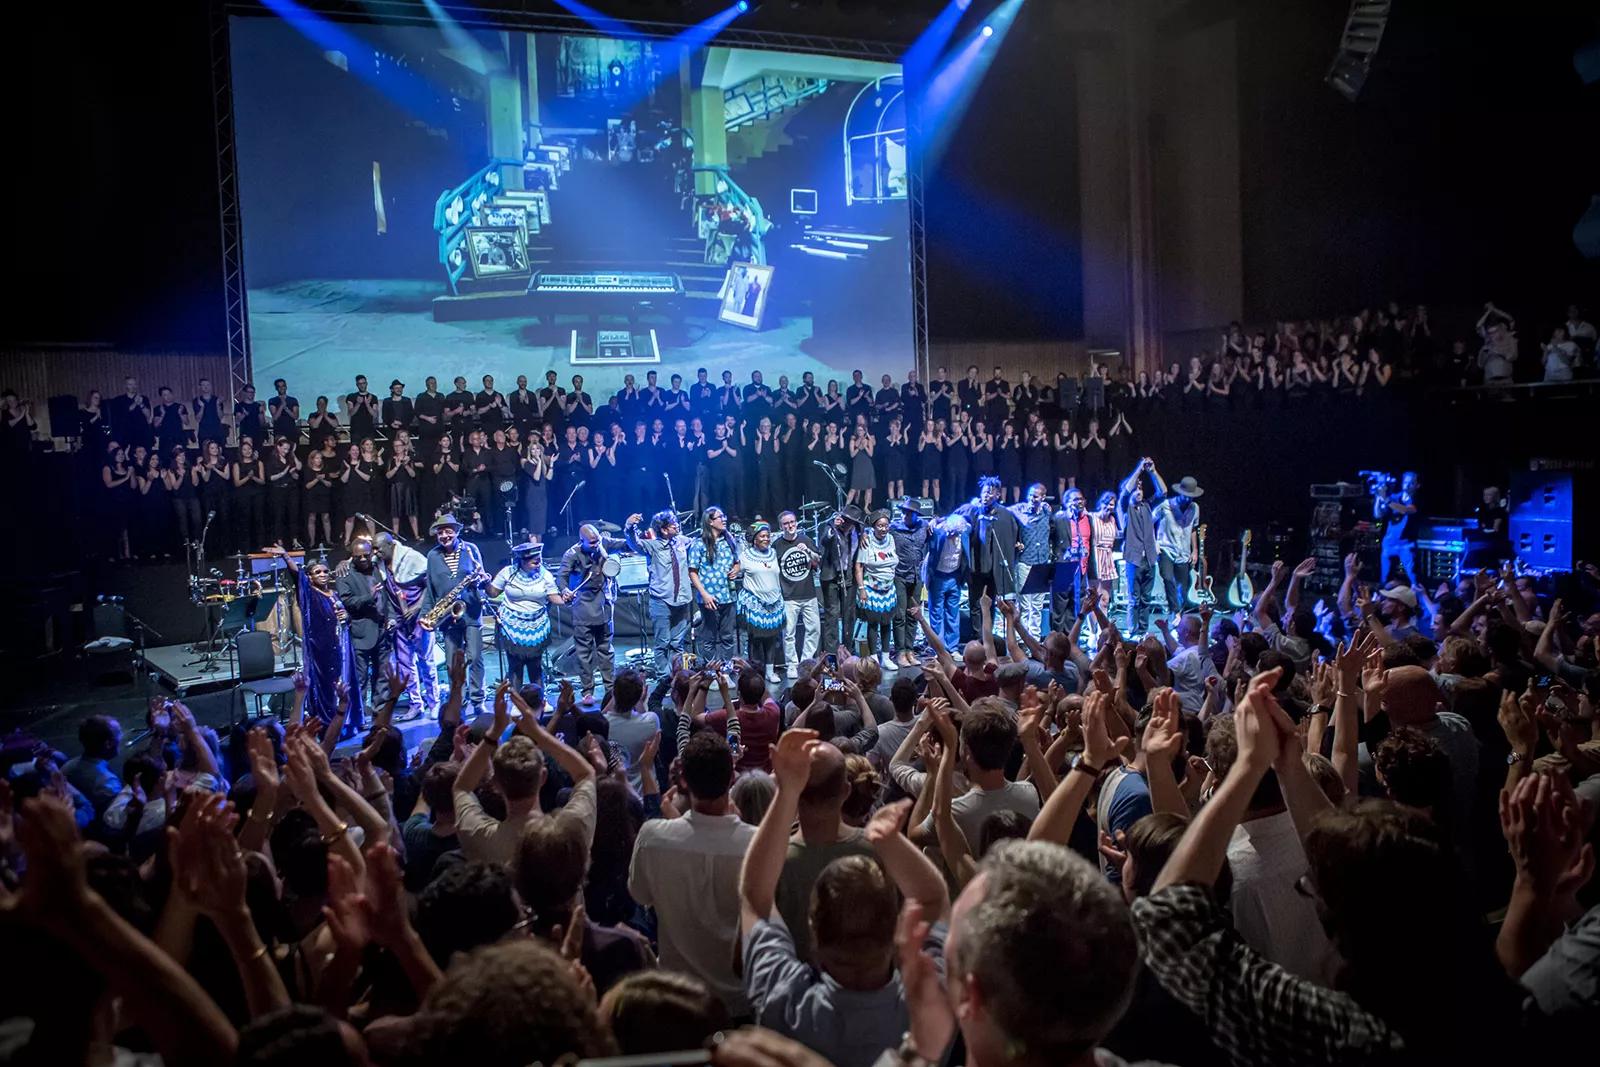 The performers of Atomic Bomb! are given a standing ovation on stage at the climax of the Meltdown 2015 concert